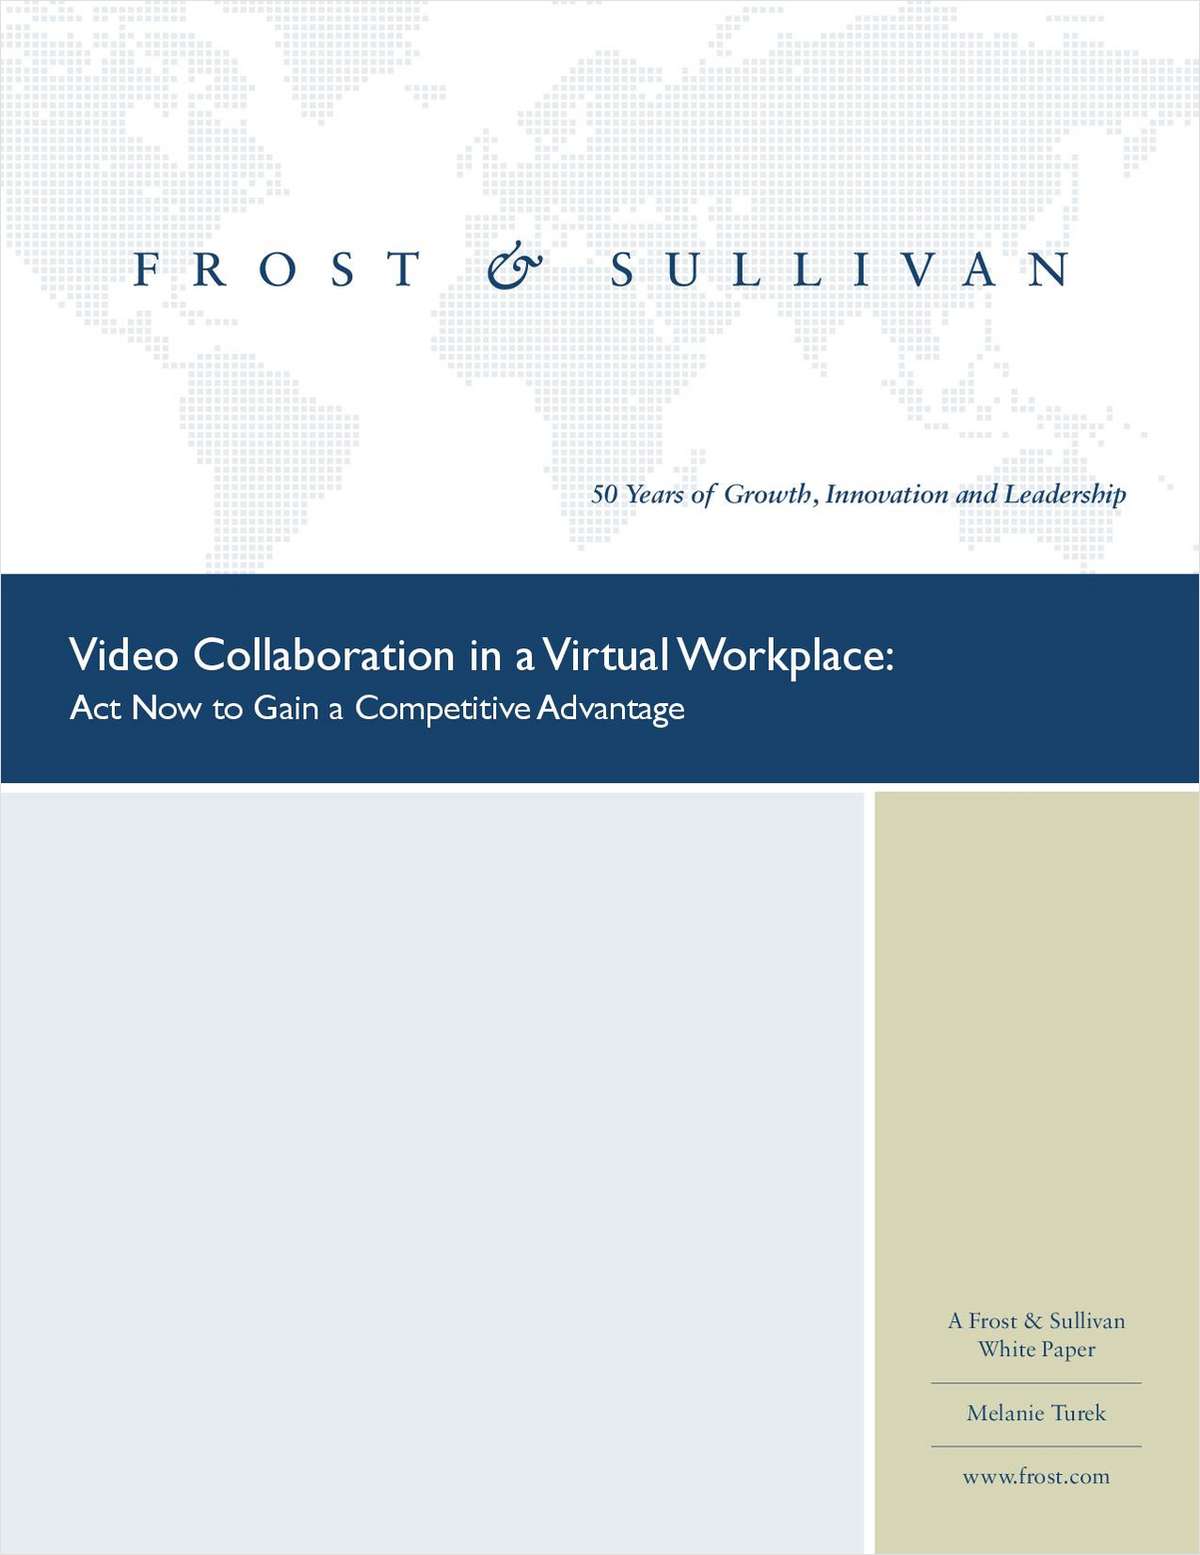 Video Collaboration in a Virtual Workplace: Act Now to Gain a Competitive Advantage